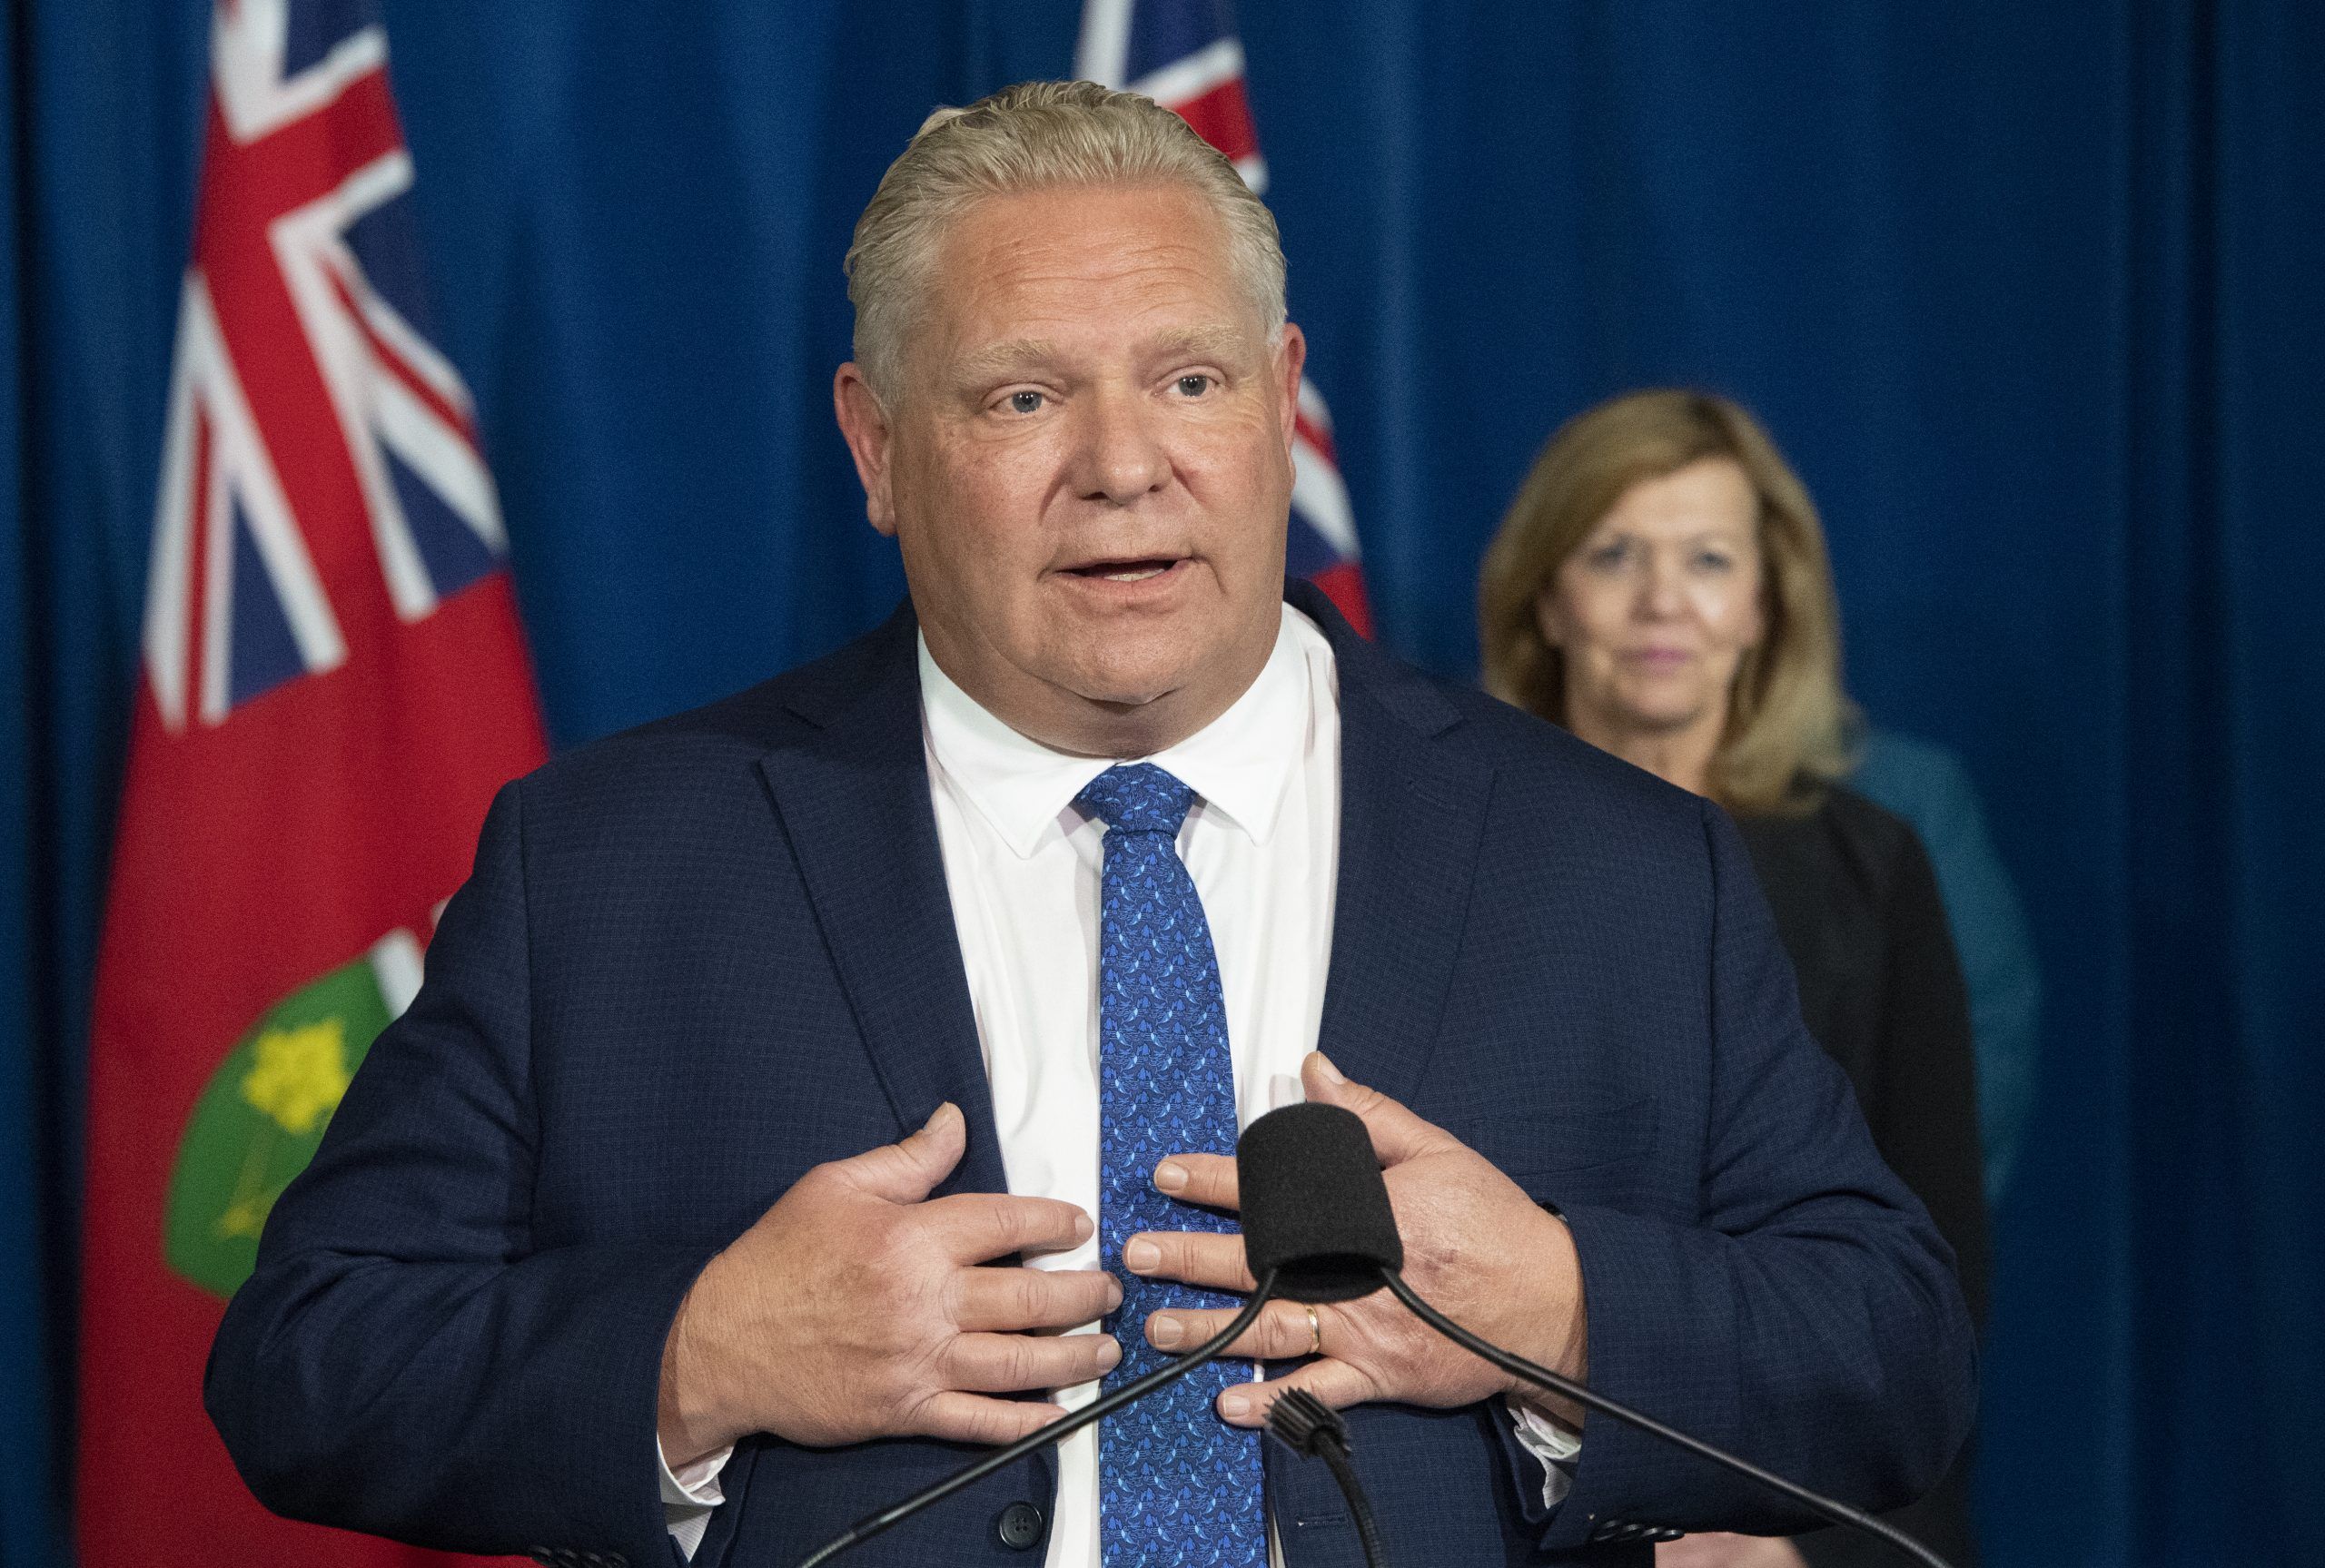 Ontario Premier Doug Ford answers questions during the daily briefing at Queen's Park in Toronto on Monday November 16, 2020 as Health Minister Christine Elliott listens.